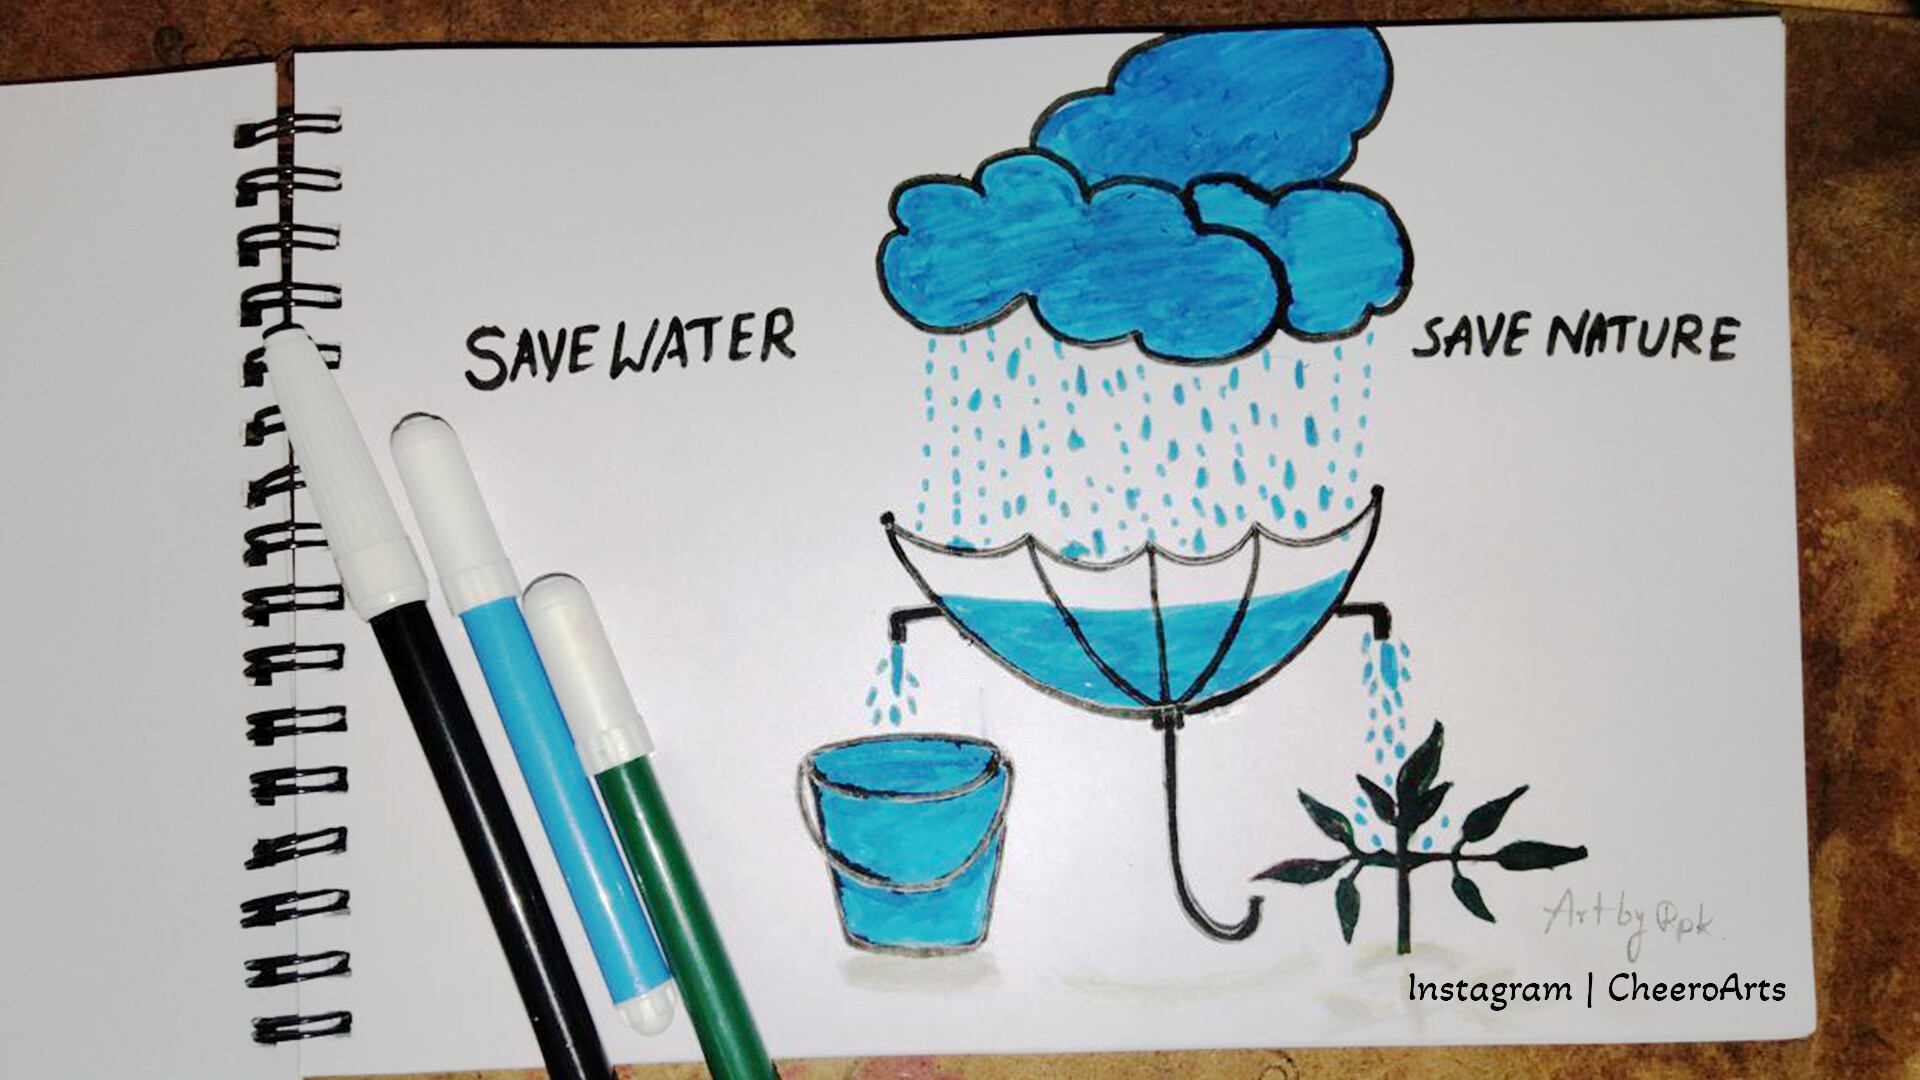 Save Water Concept Boy Turned On The Tap And A Lot Of Water Flowing Out On  Floor Man Wasting Water Photo Of Colorful Drawing Stock Photo - Download  Image Now - iStock